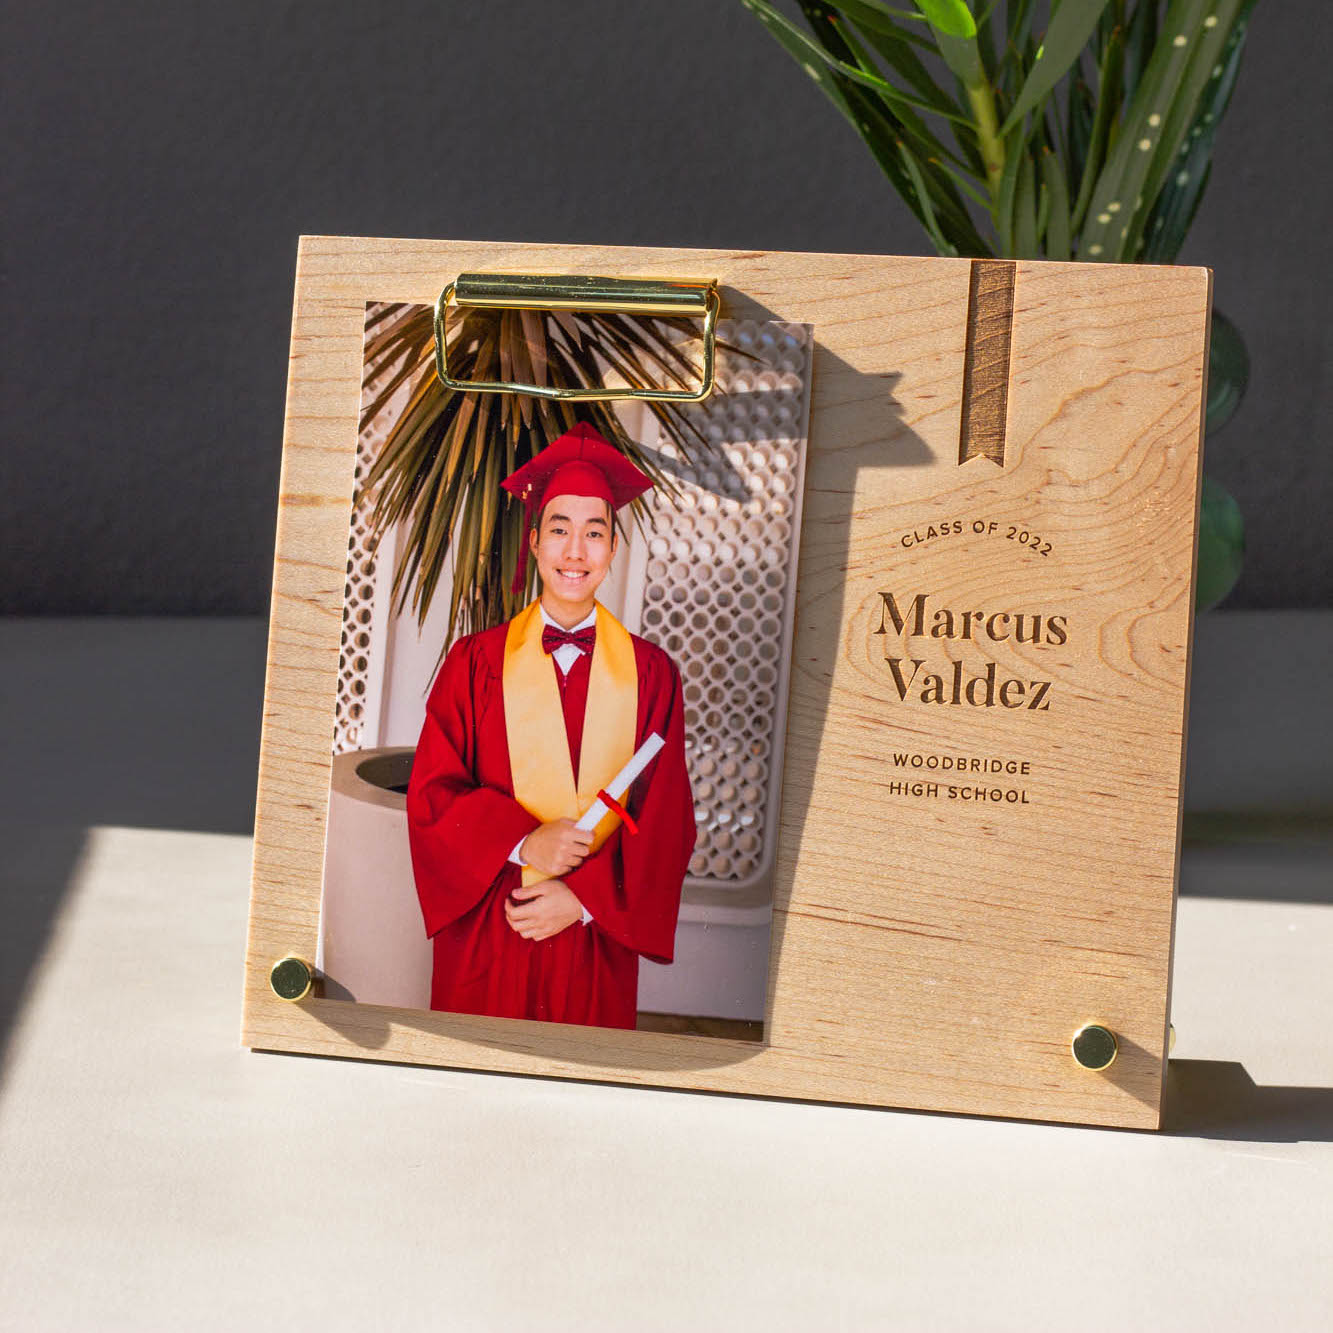 Hereafter Personalized Wood Photo Frame